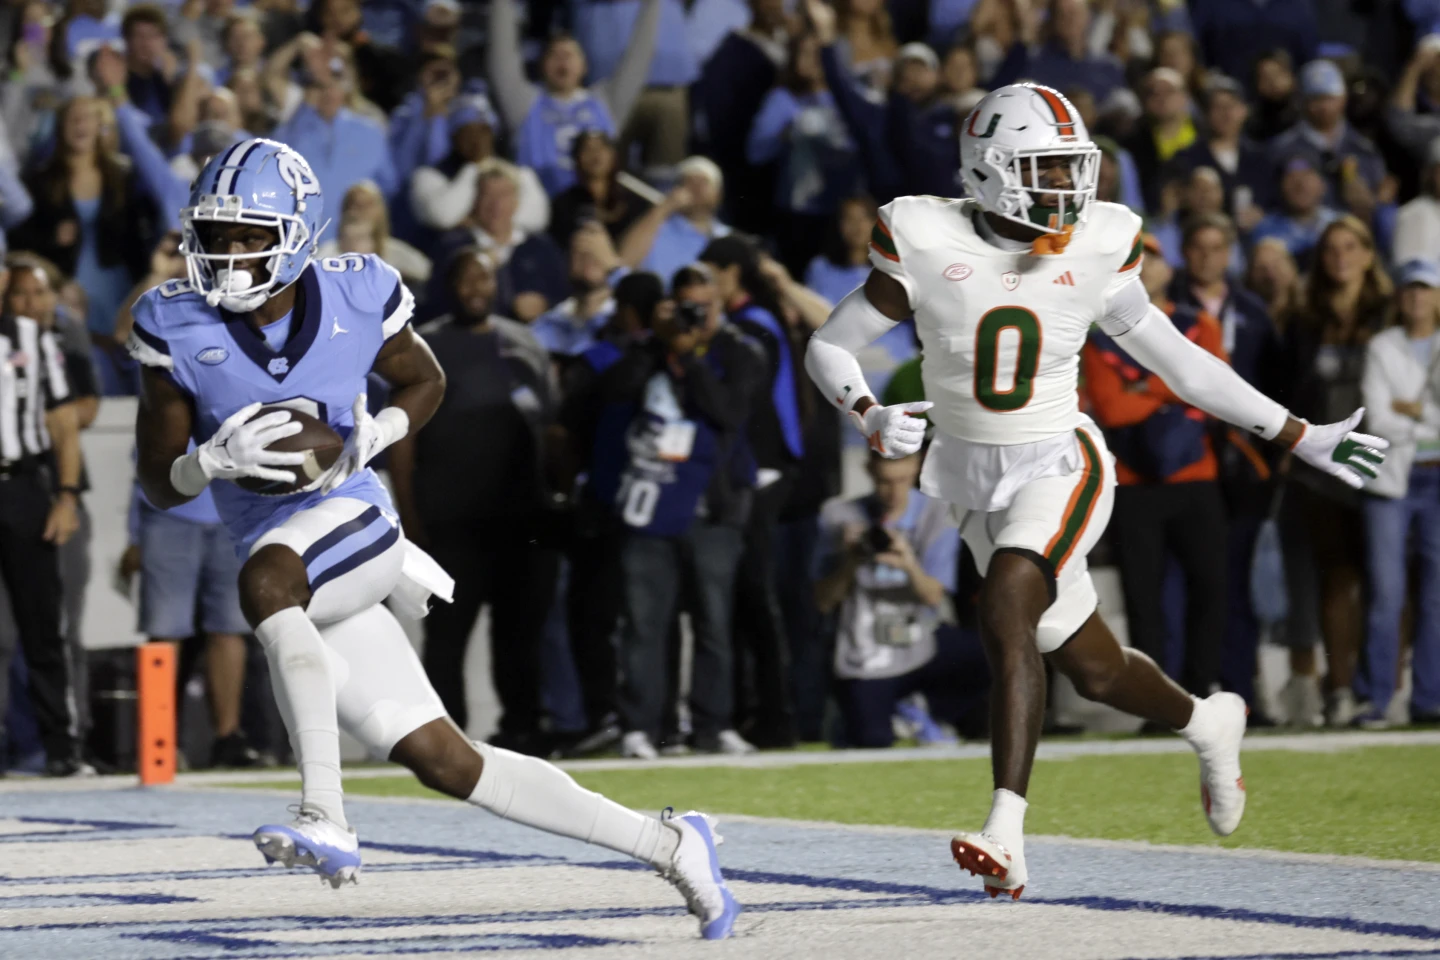 Tez Walker snags 3 TD catches to help No. 12 UNC beat No. 25 Miami 41-31